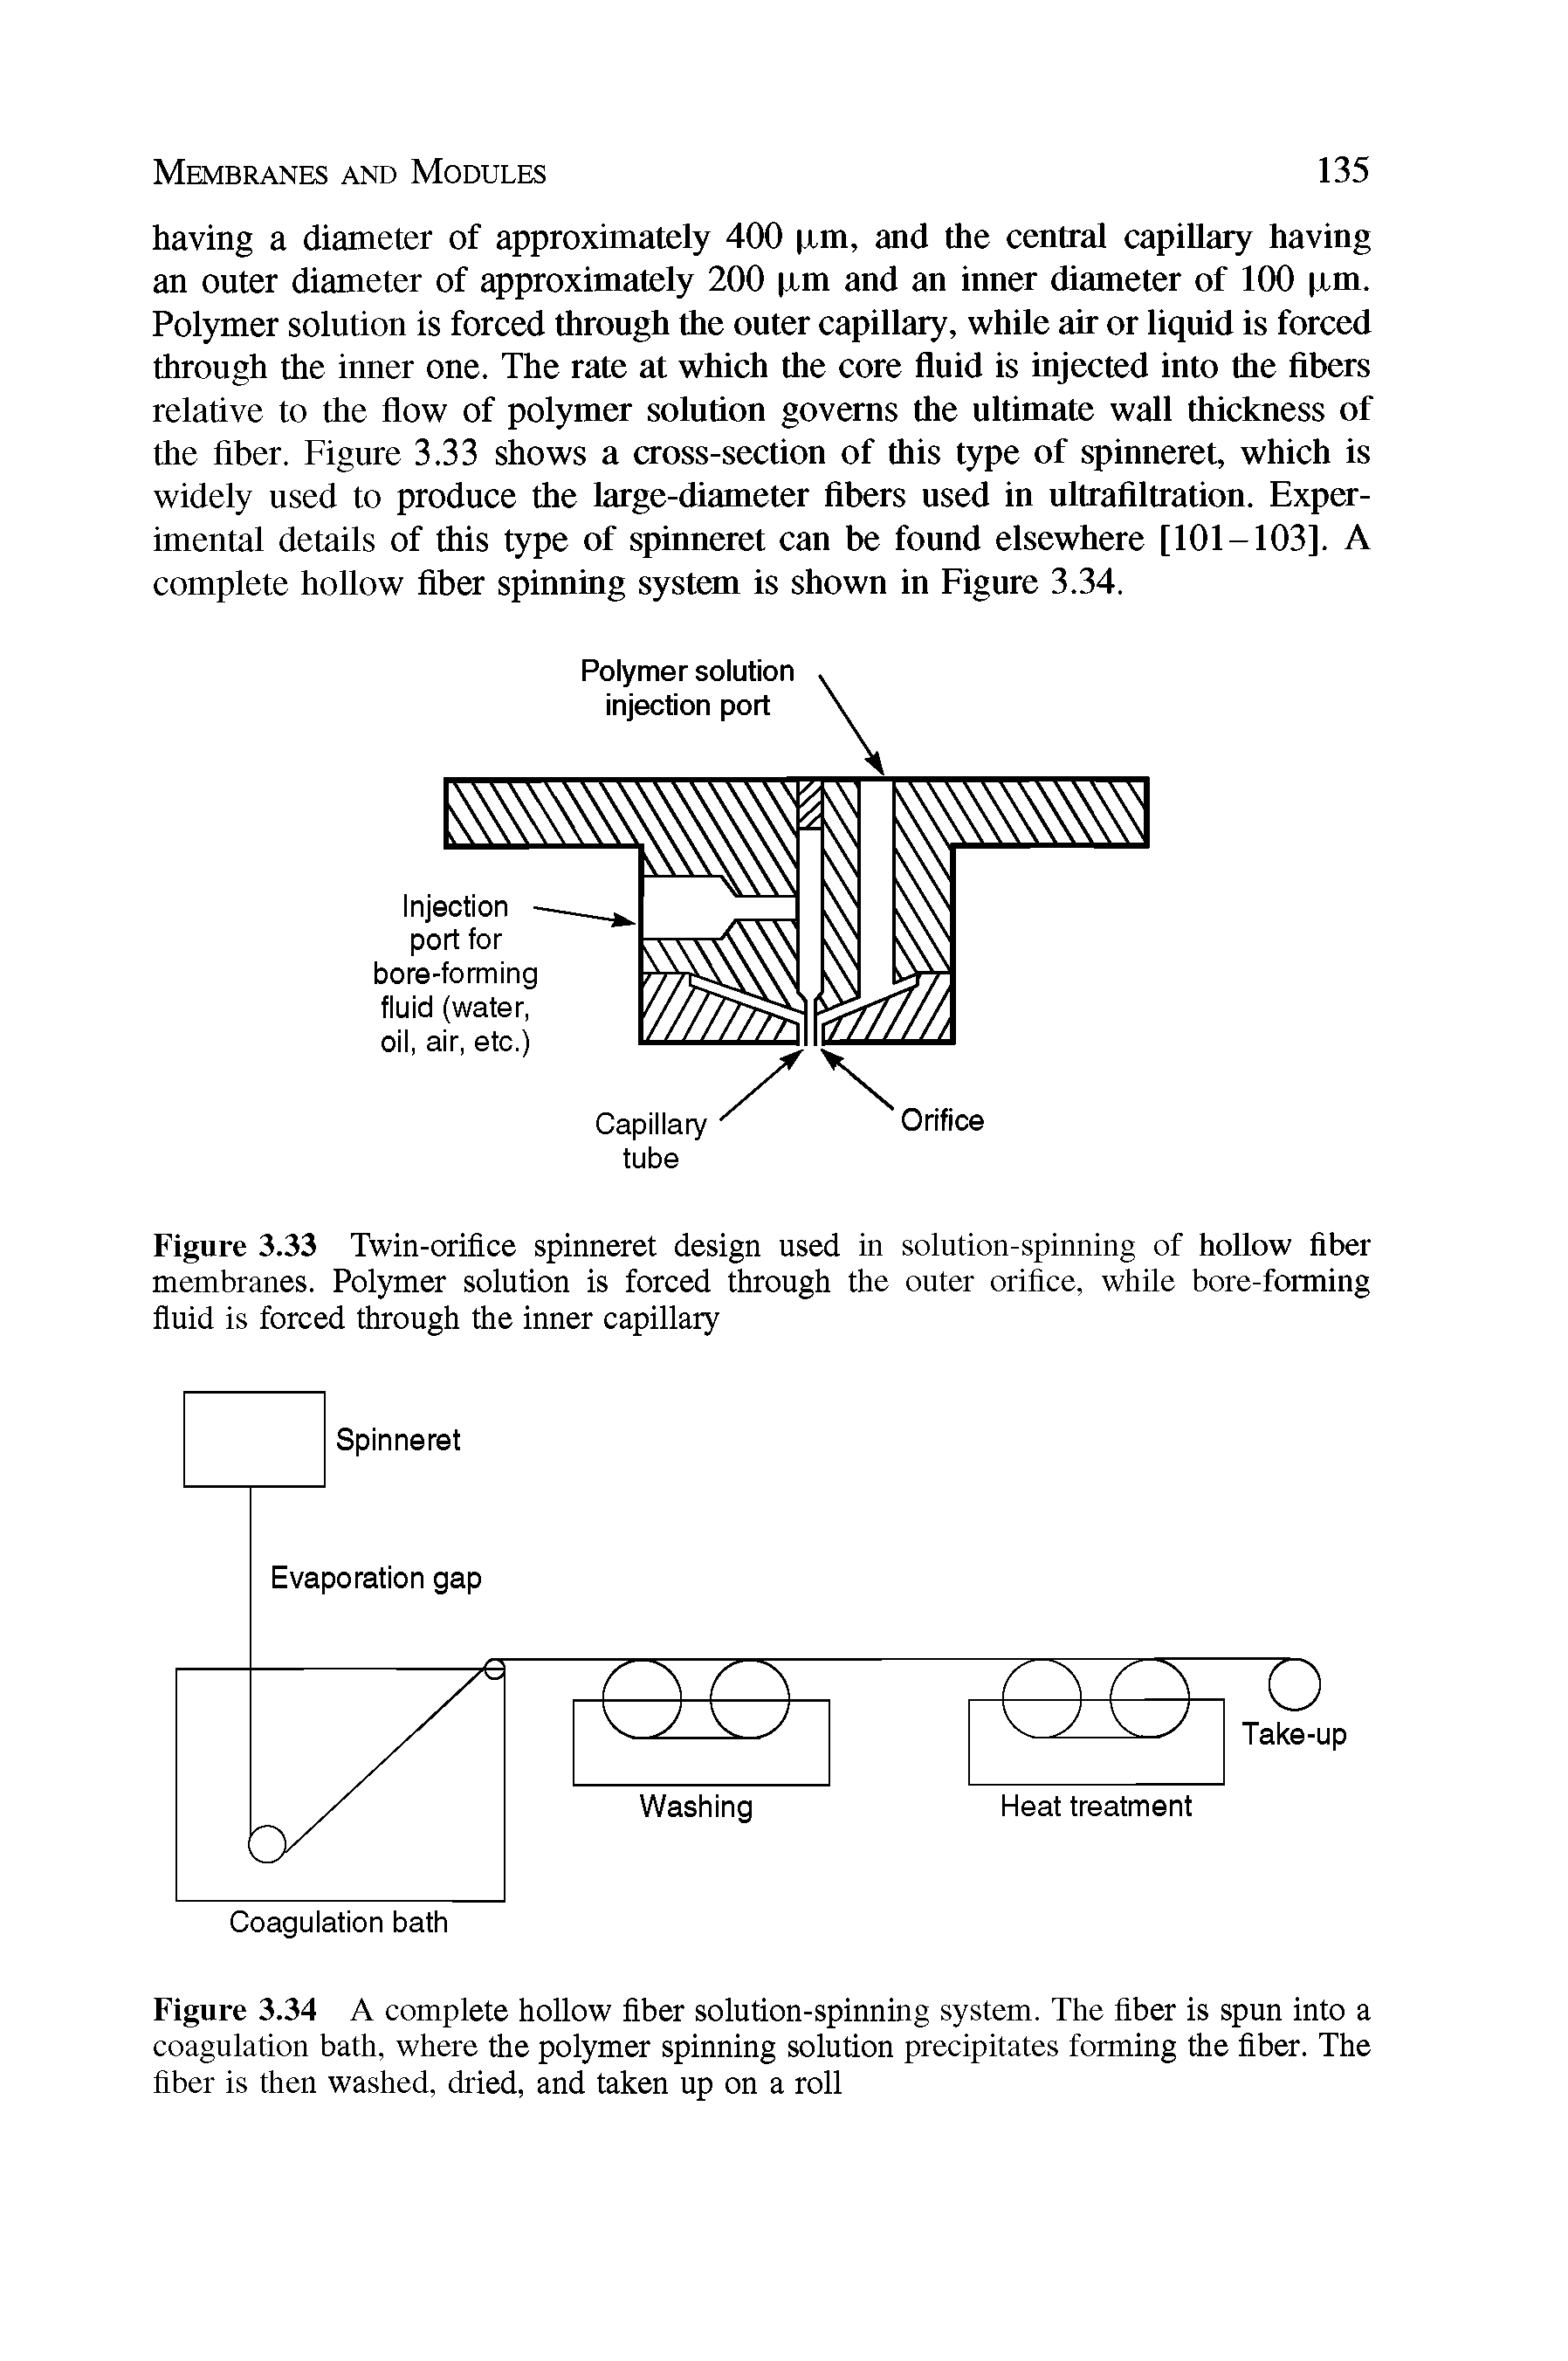 Figure 3.33 Twin-orifice spinneret design used in solution-spinning of hollow fiber membranes. Polymer solution is forced through the outer orifice, while bore-forming fluid is forced through the inner capillary...